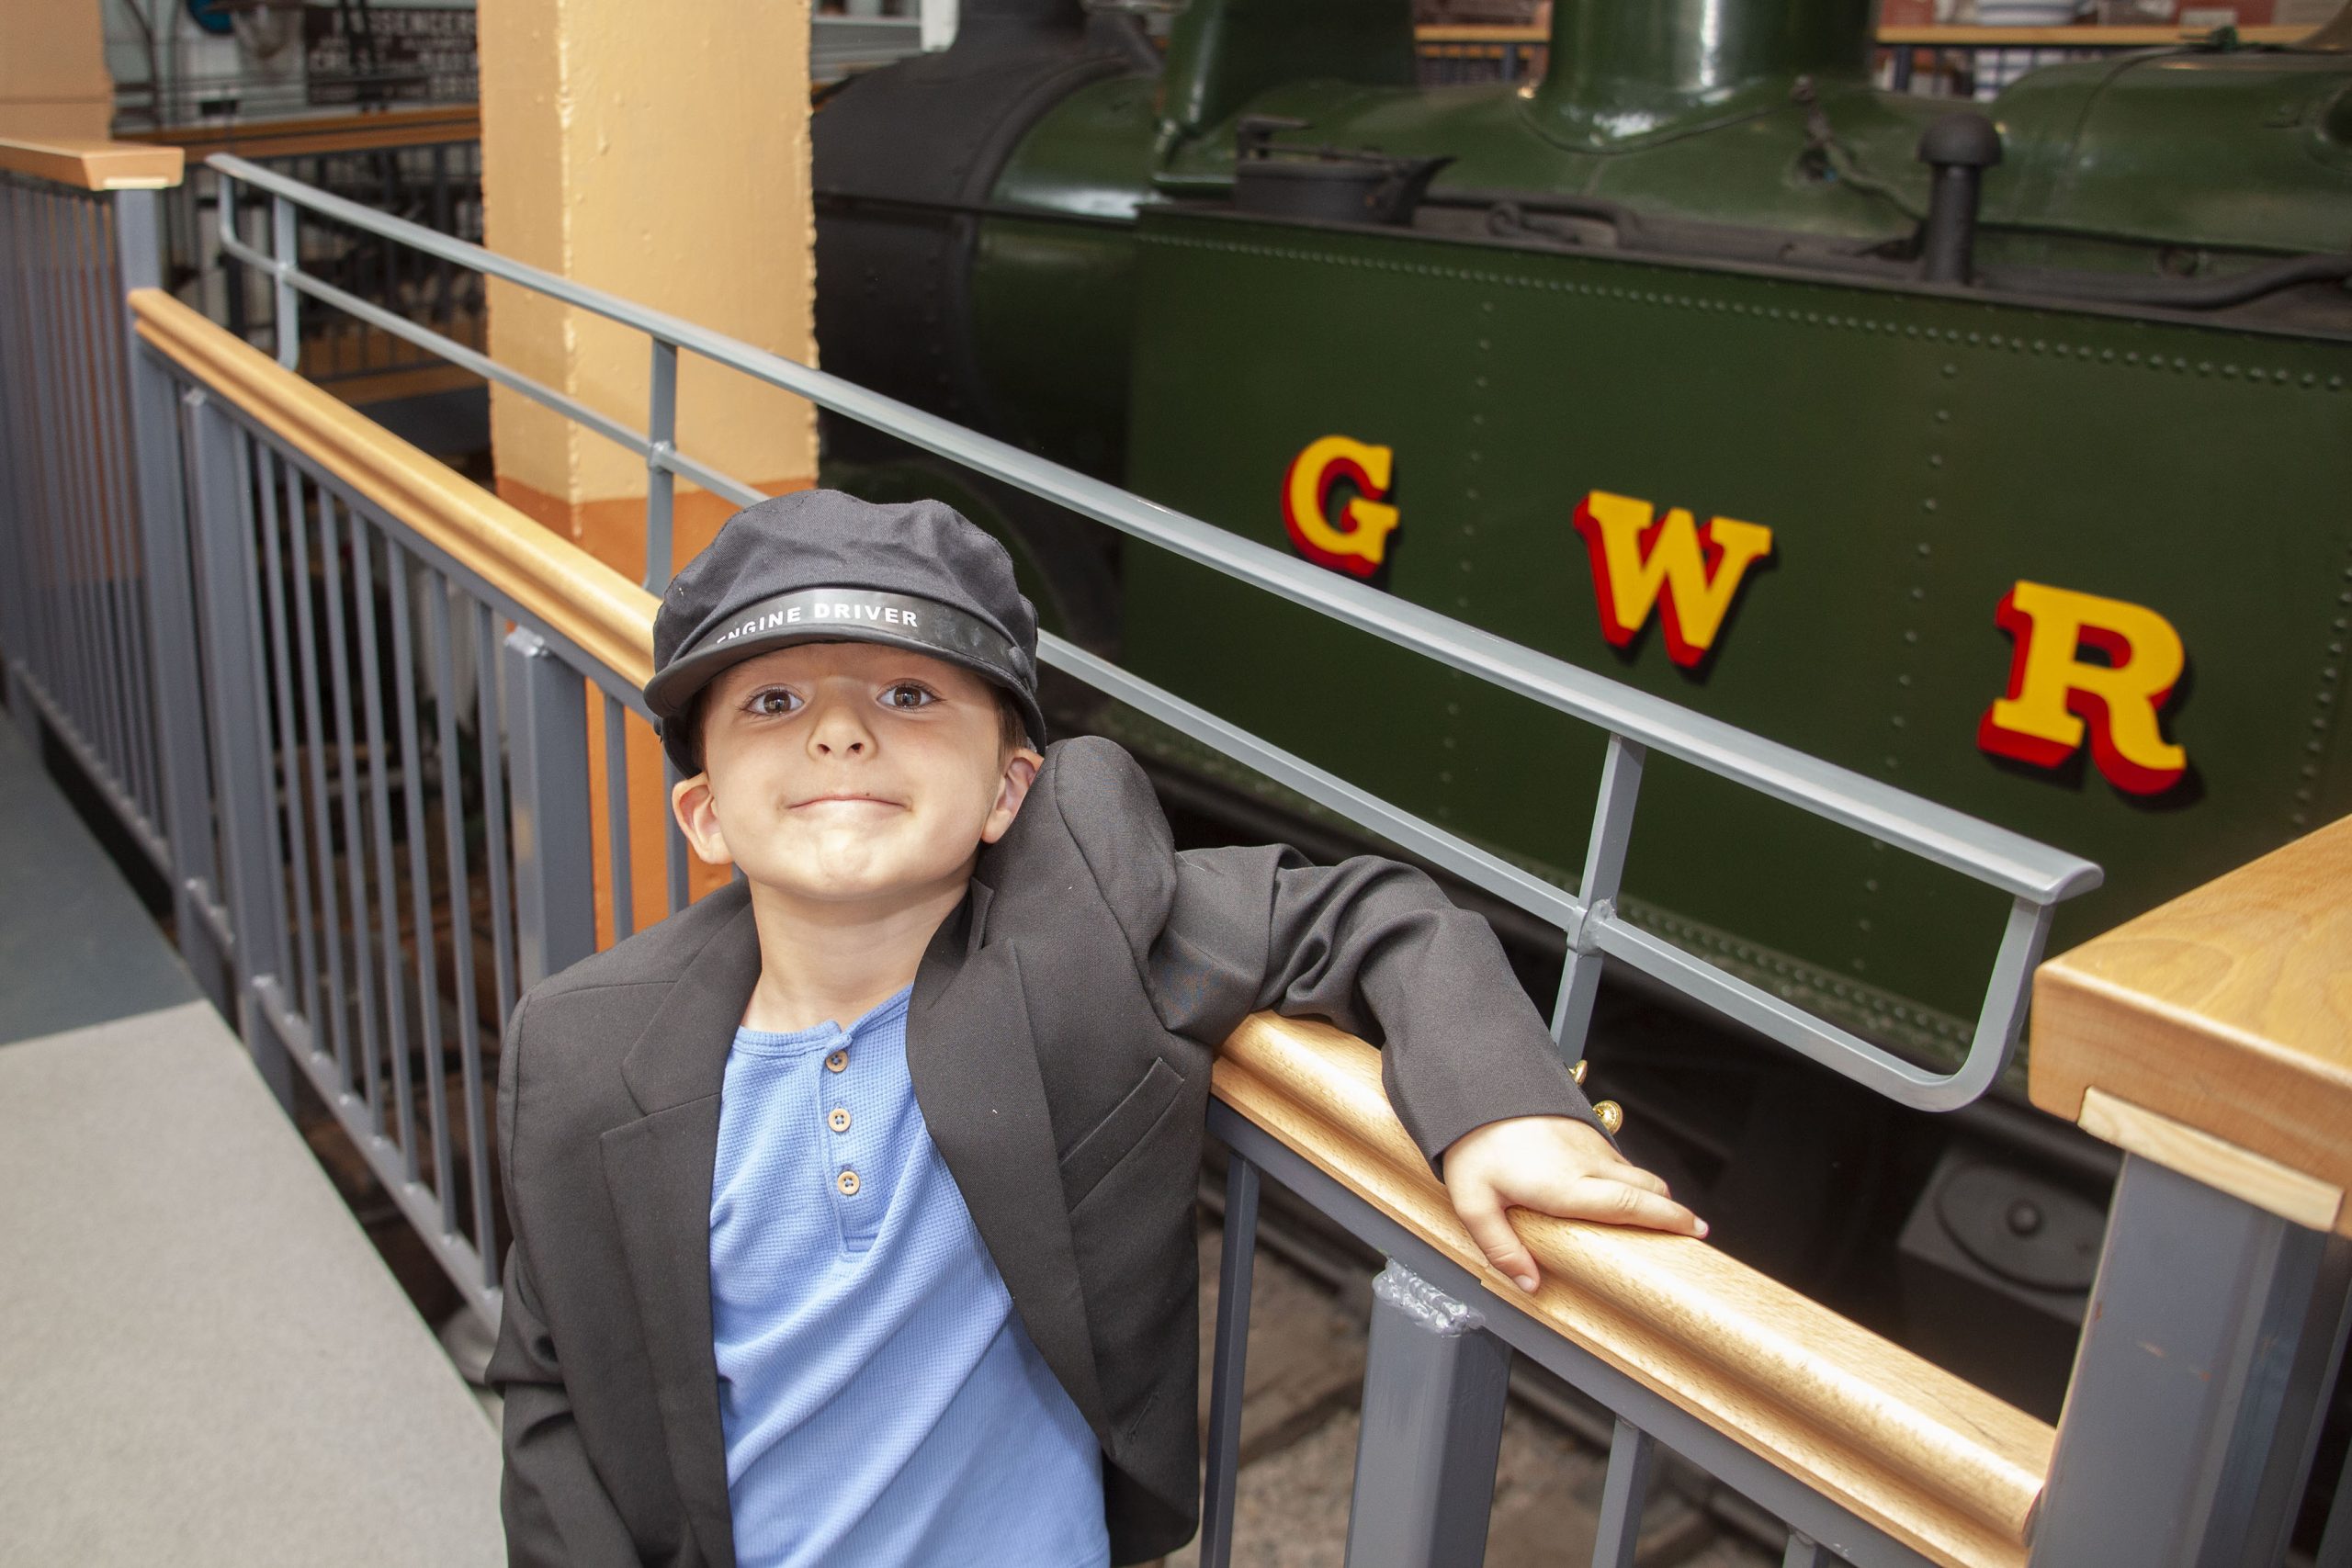 A young boy wearing a dressing up black jacket and an engine driver's black cap, standing in front of a green steam engine inside a museum gallery.